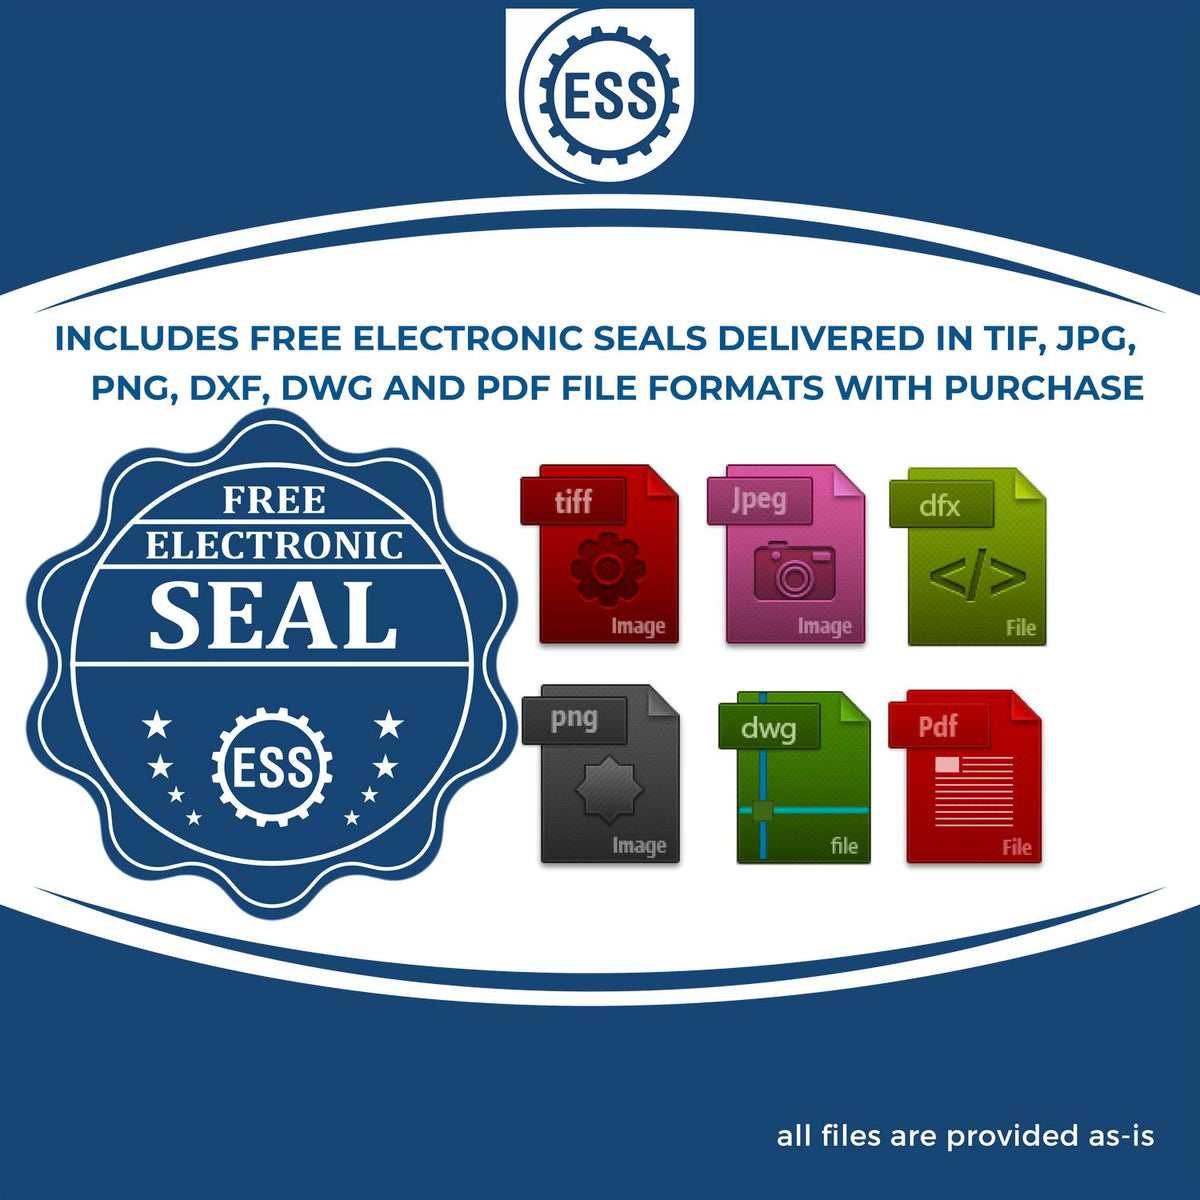 An infographic for the free electronic seal for the Slim Pre-Inked Delaware Professional Engineer Seal Stamp illustrating the different file type icons such as DXF, DWG, TIF, JPG and PNG.